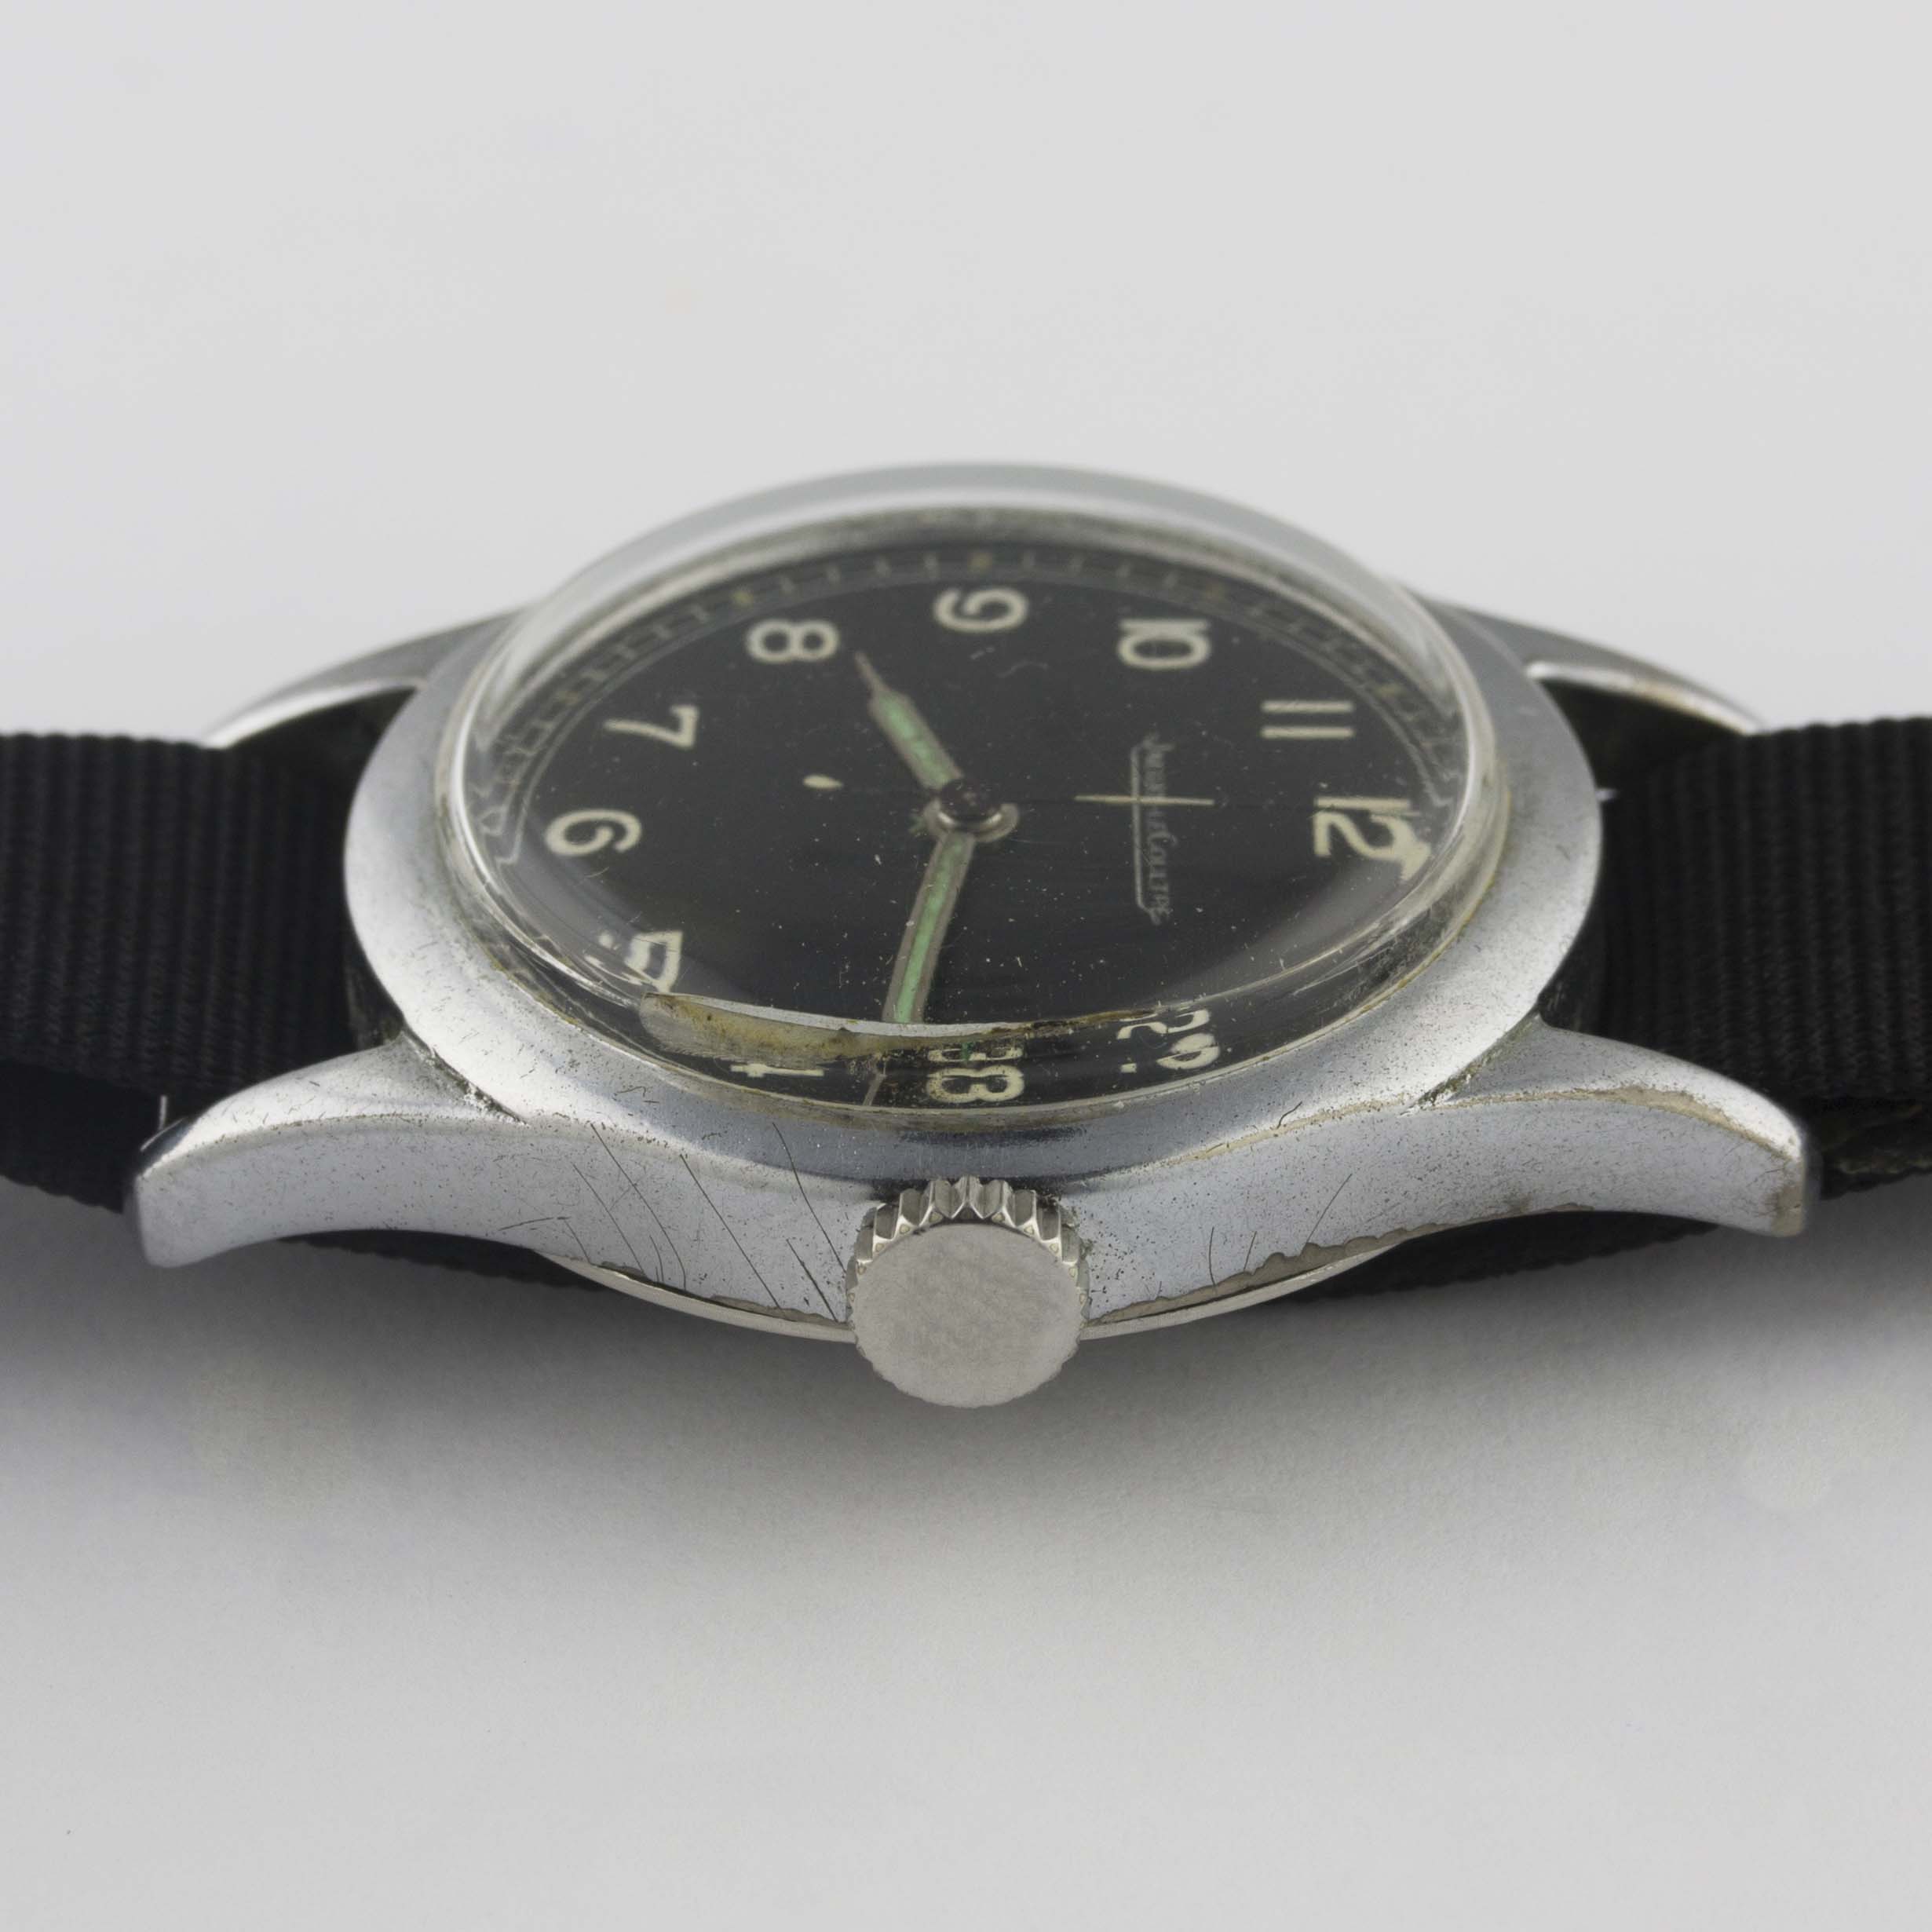 A GENTLEMAN'S BRITISH MILITARY JAEGER LECOULTRE RAF PILOTS WRIST WATCH CIRCA 1940, WITH BLACK MOD - Image 9 of 10